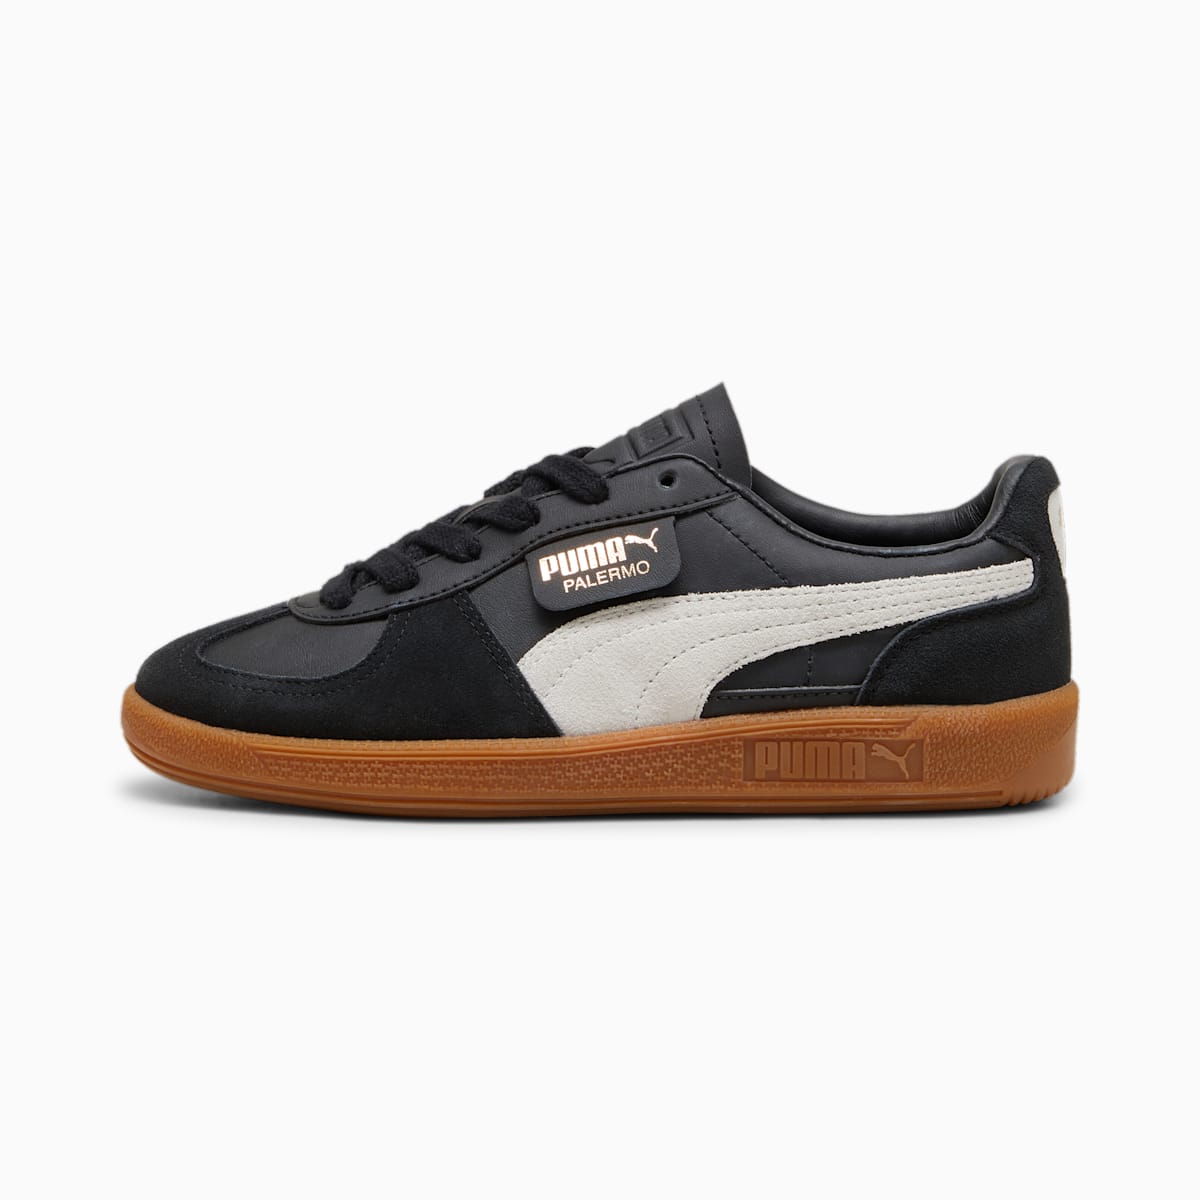 Palermo Lth Youth Sneakers